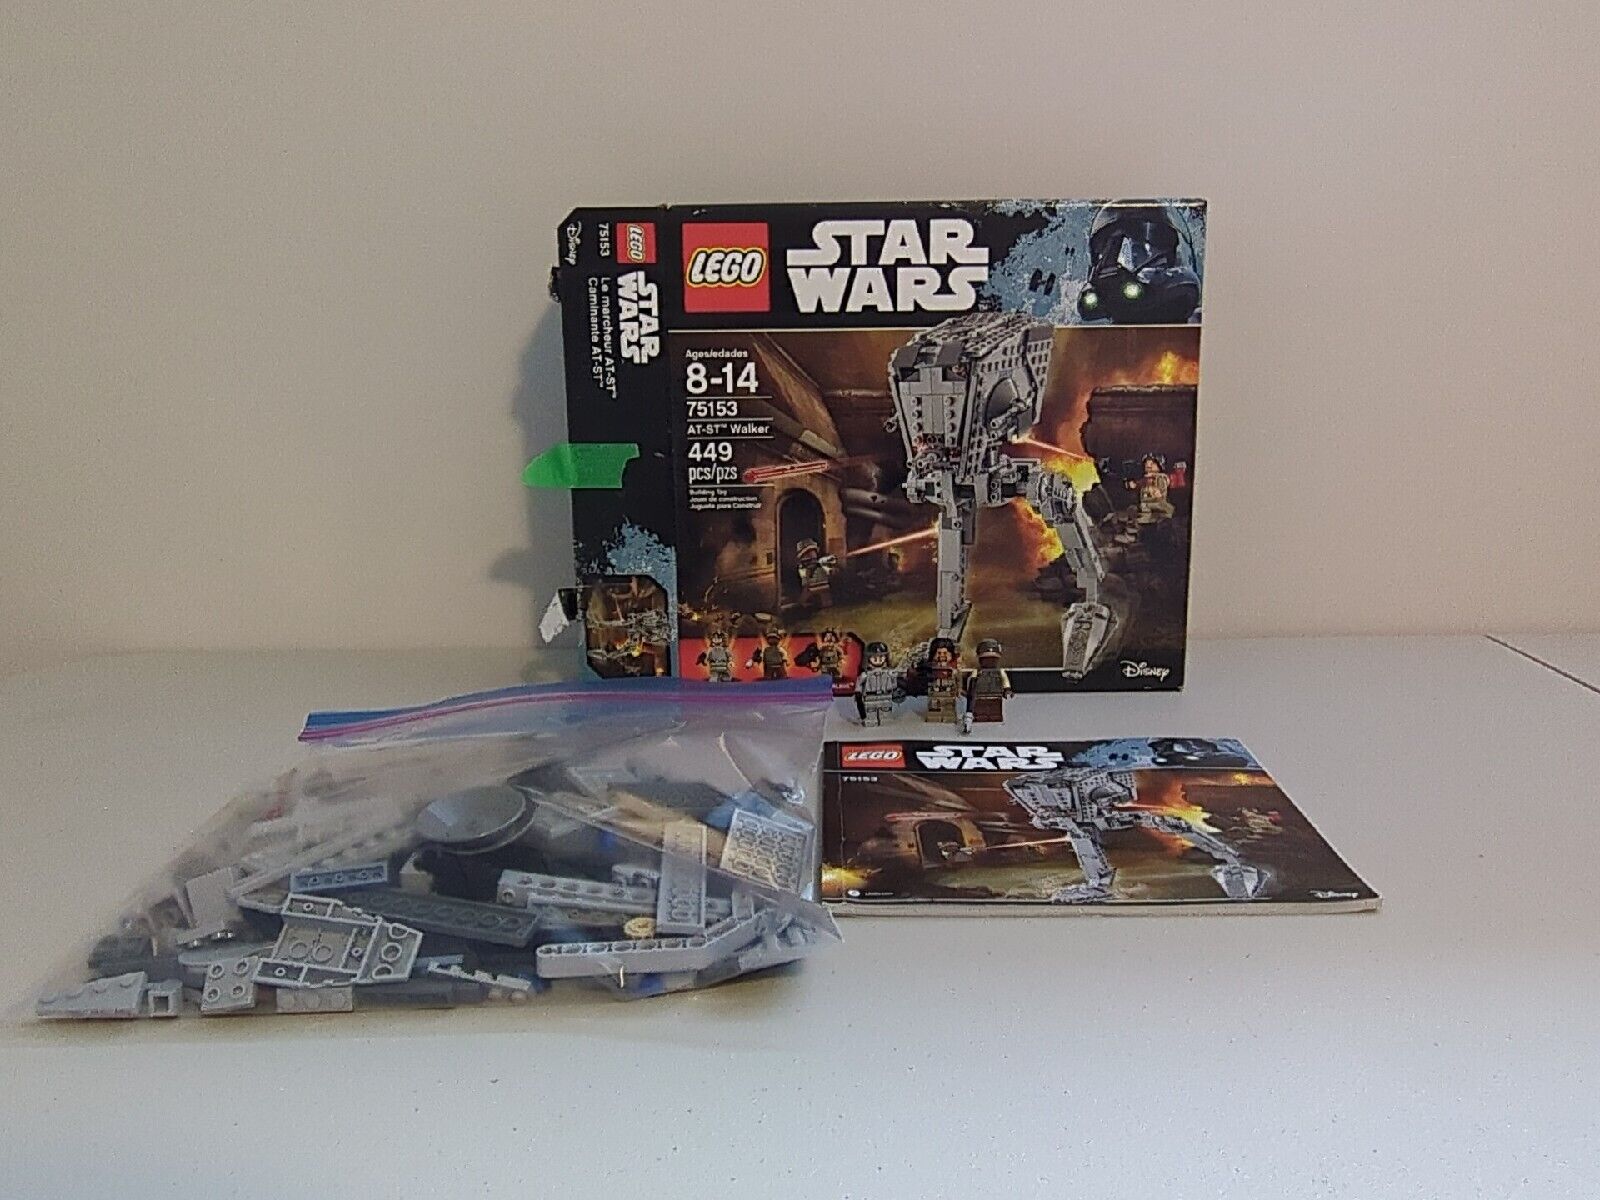 Lego Star Wars AT-ST Walker 75153 - Complete w/ Instructions & Box